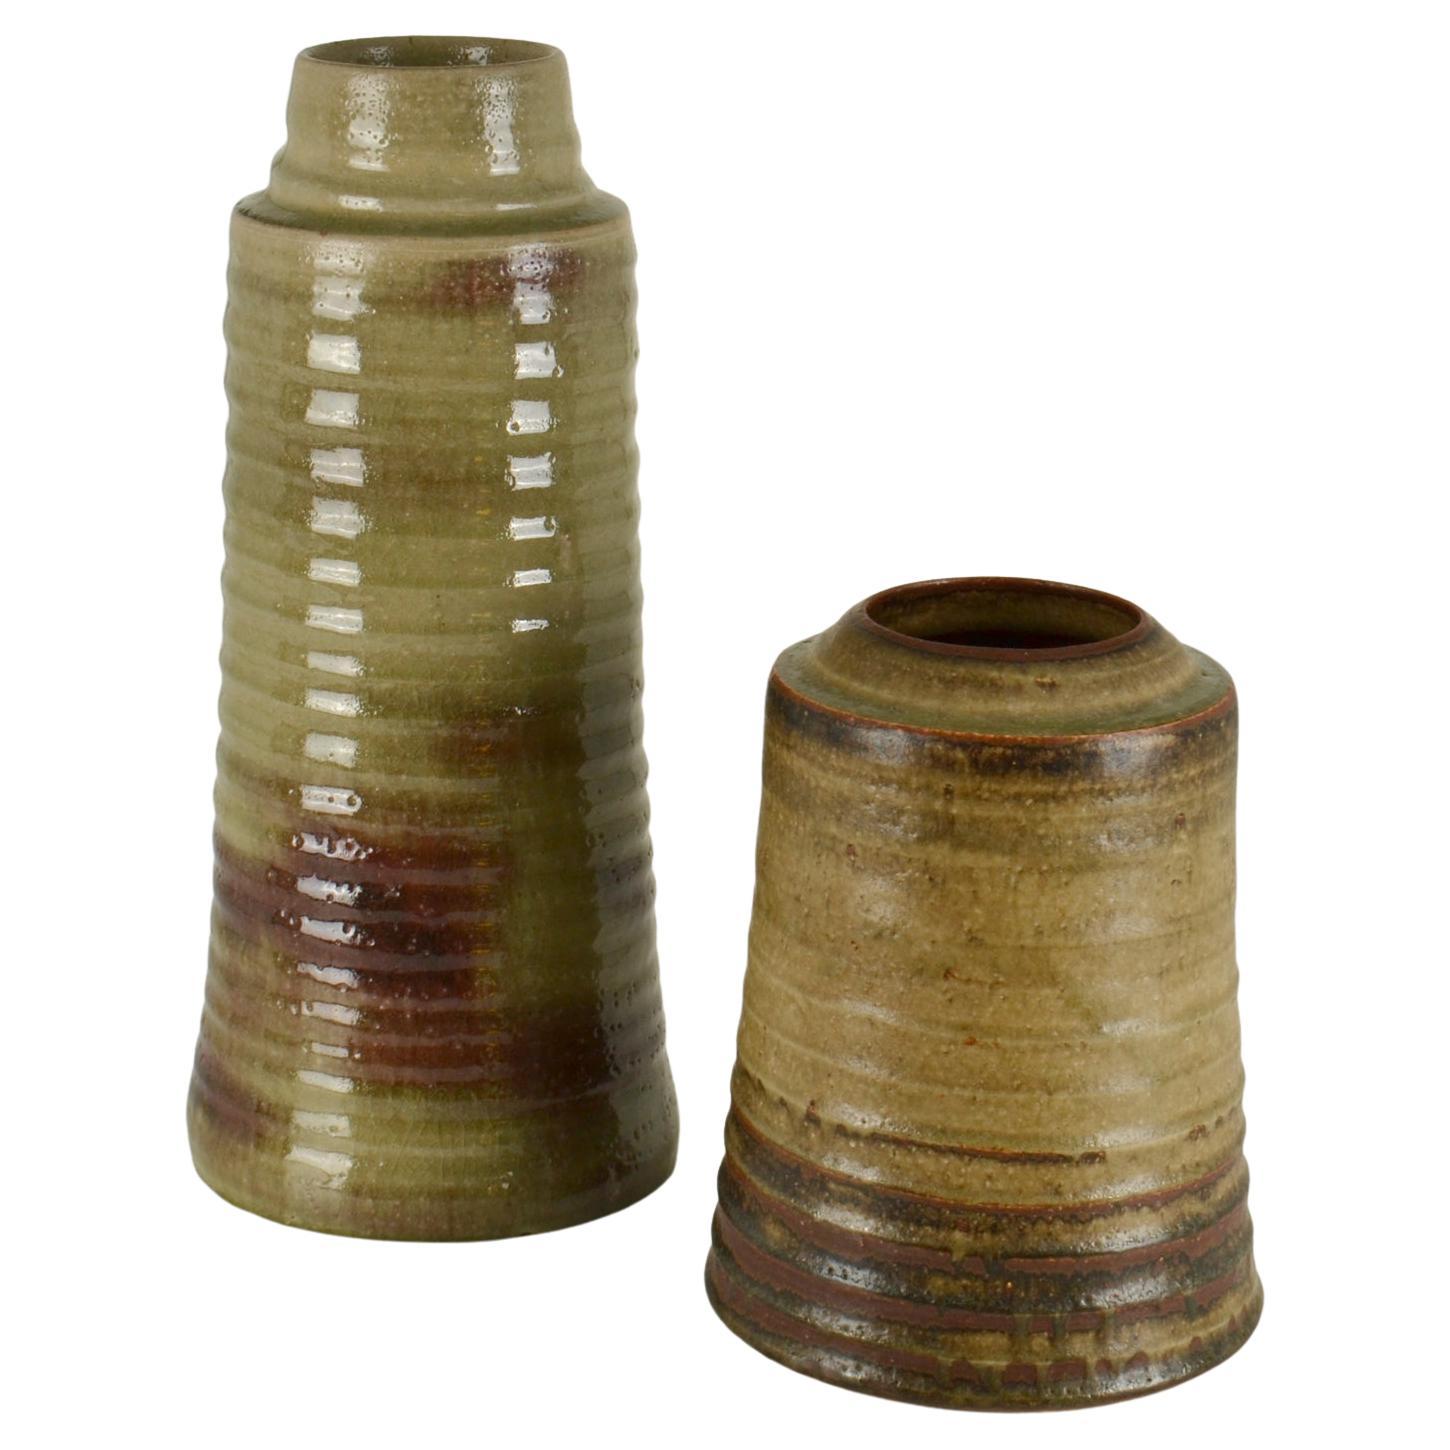 Tall Mid Century Ceramic Studio Vases in Earth Tones by Mobach For Sale